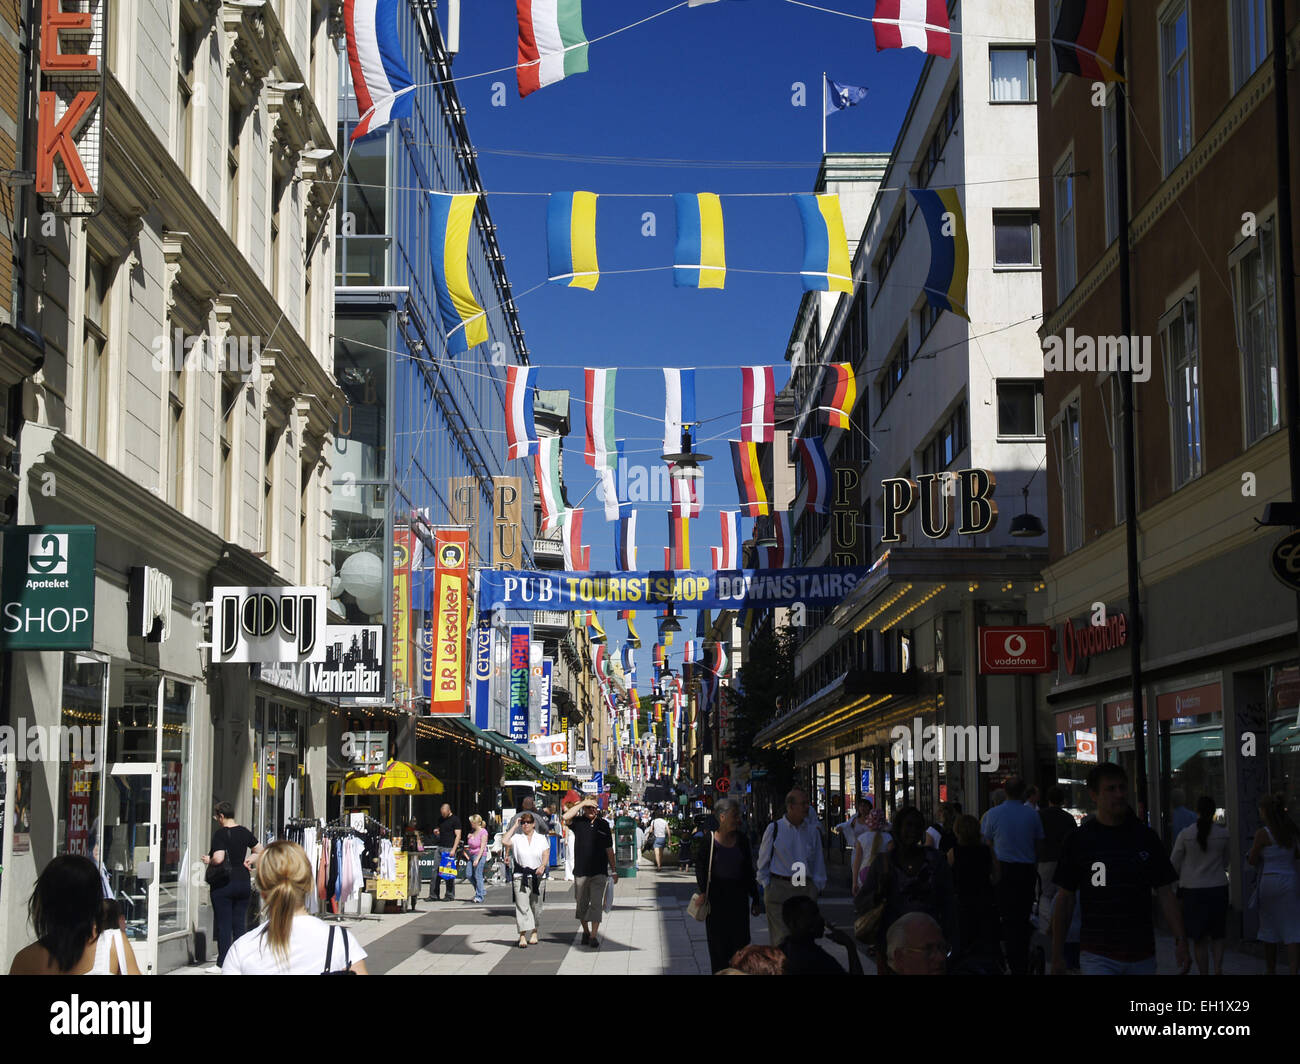 Page 9 - Stockholm Shopping Street High Resolution Stock Photography and  Images - Alamy